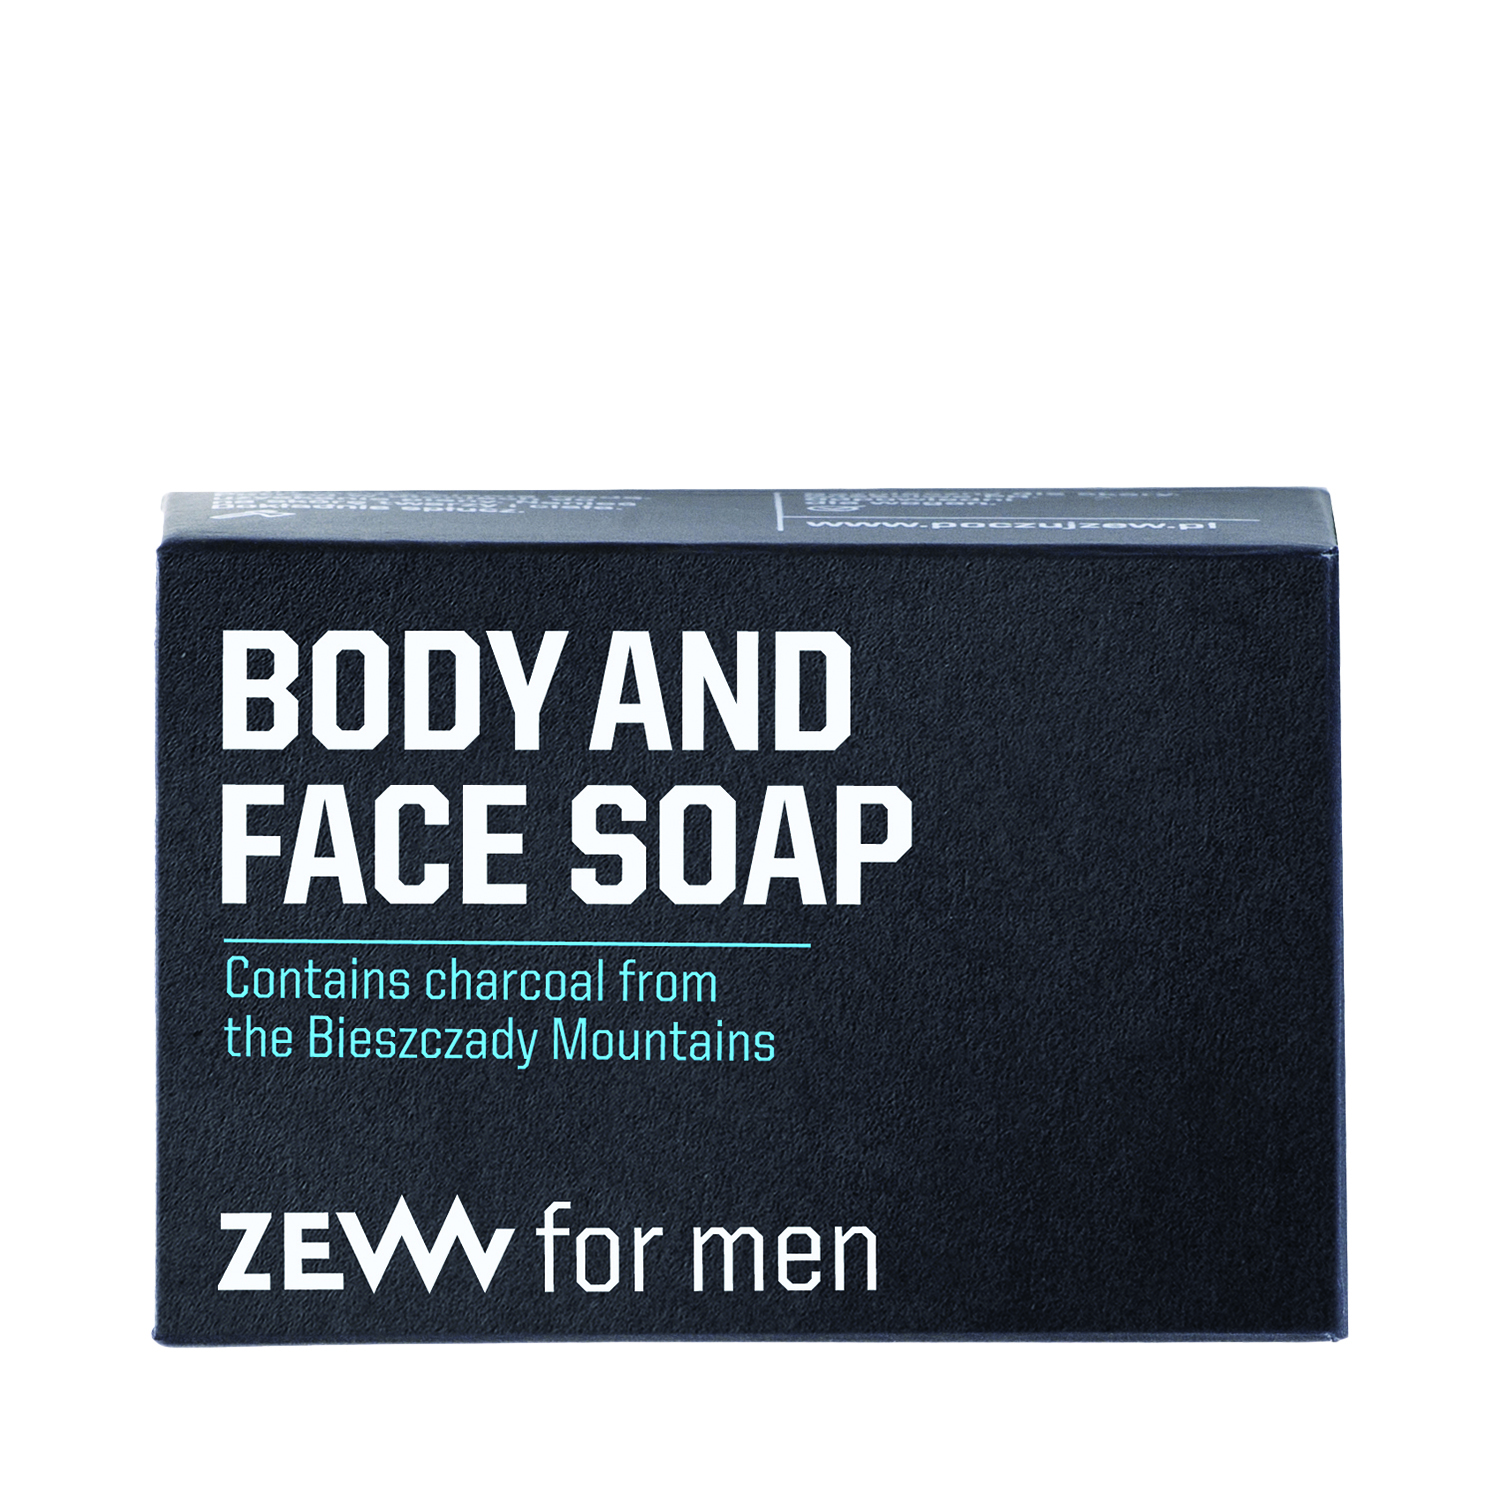 ZEW for men - Body and Face Soap - Gesichts- und Körperseife mit Aktivkohle